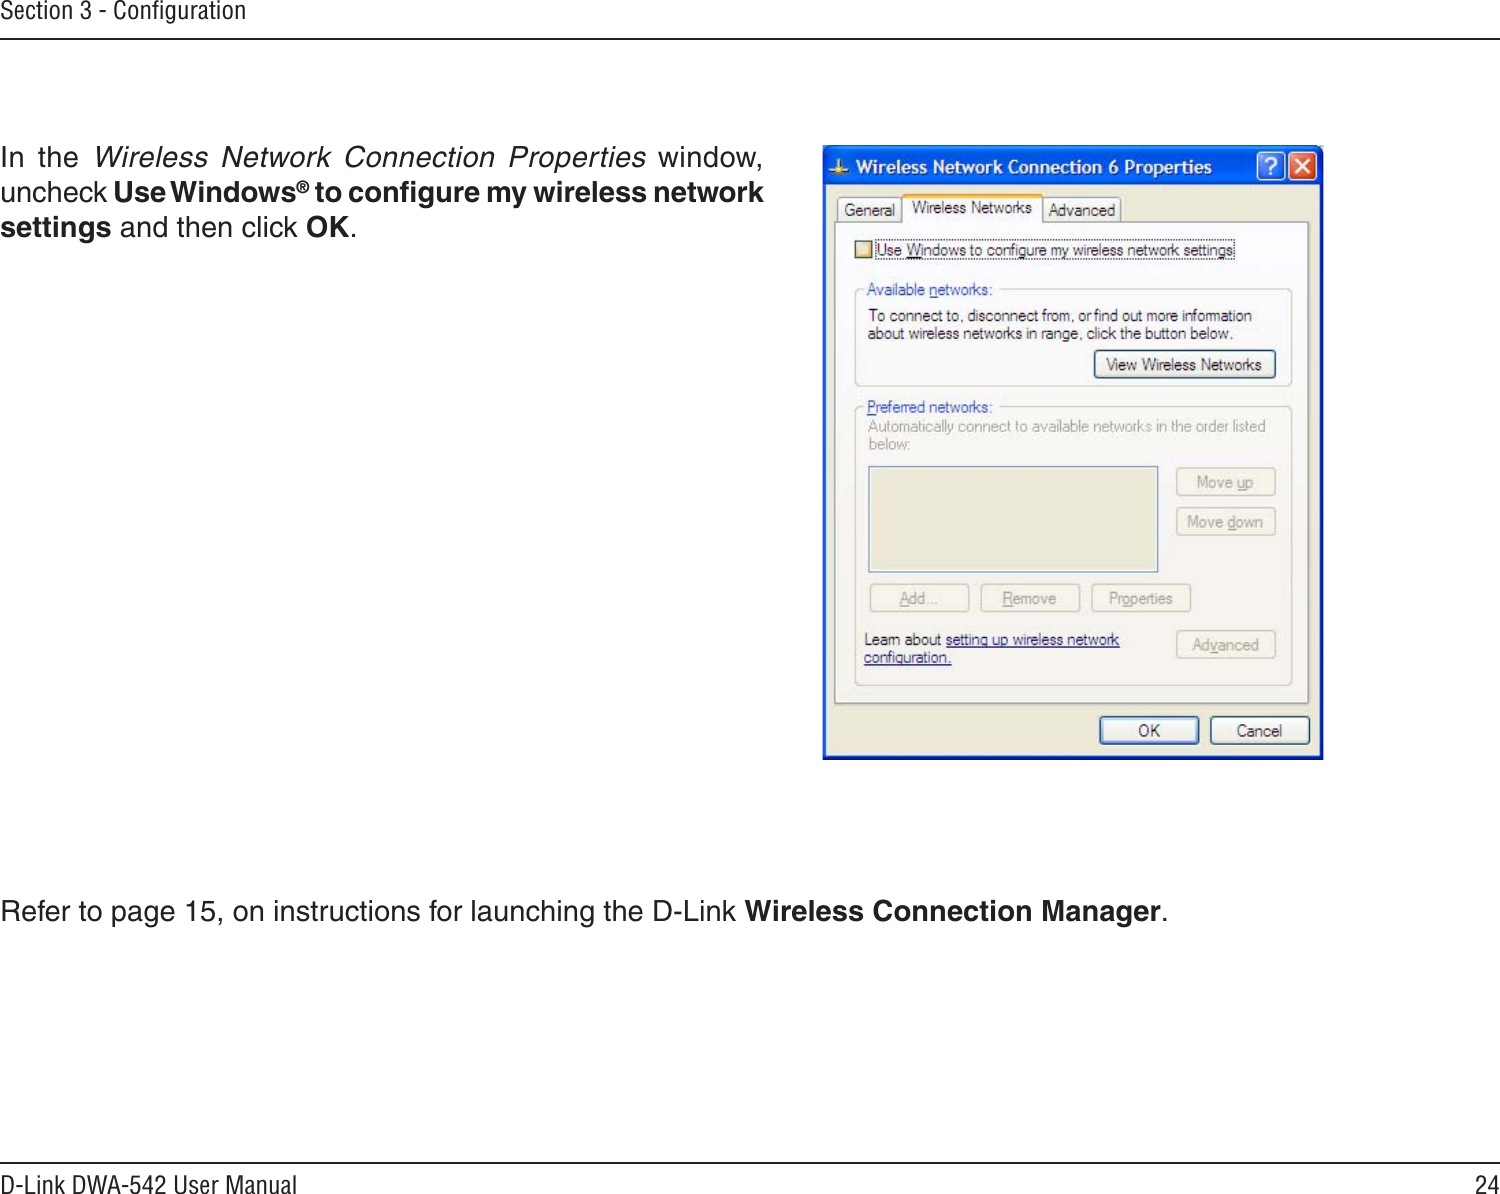 24D-Link DWA-542 User ManualSection 3 - ConﬁgurationIn  the  Wireless  Network  Connection  Properties  window, uncheck Use Windows® to conﬁgure my wireless network settings and then click OK.Refer to page 15, on instructions for launching the D-Link Wireless Connection Manager. 